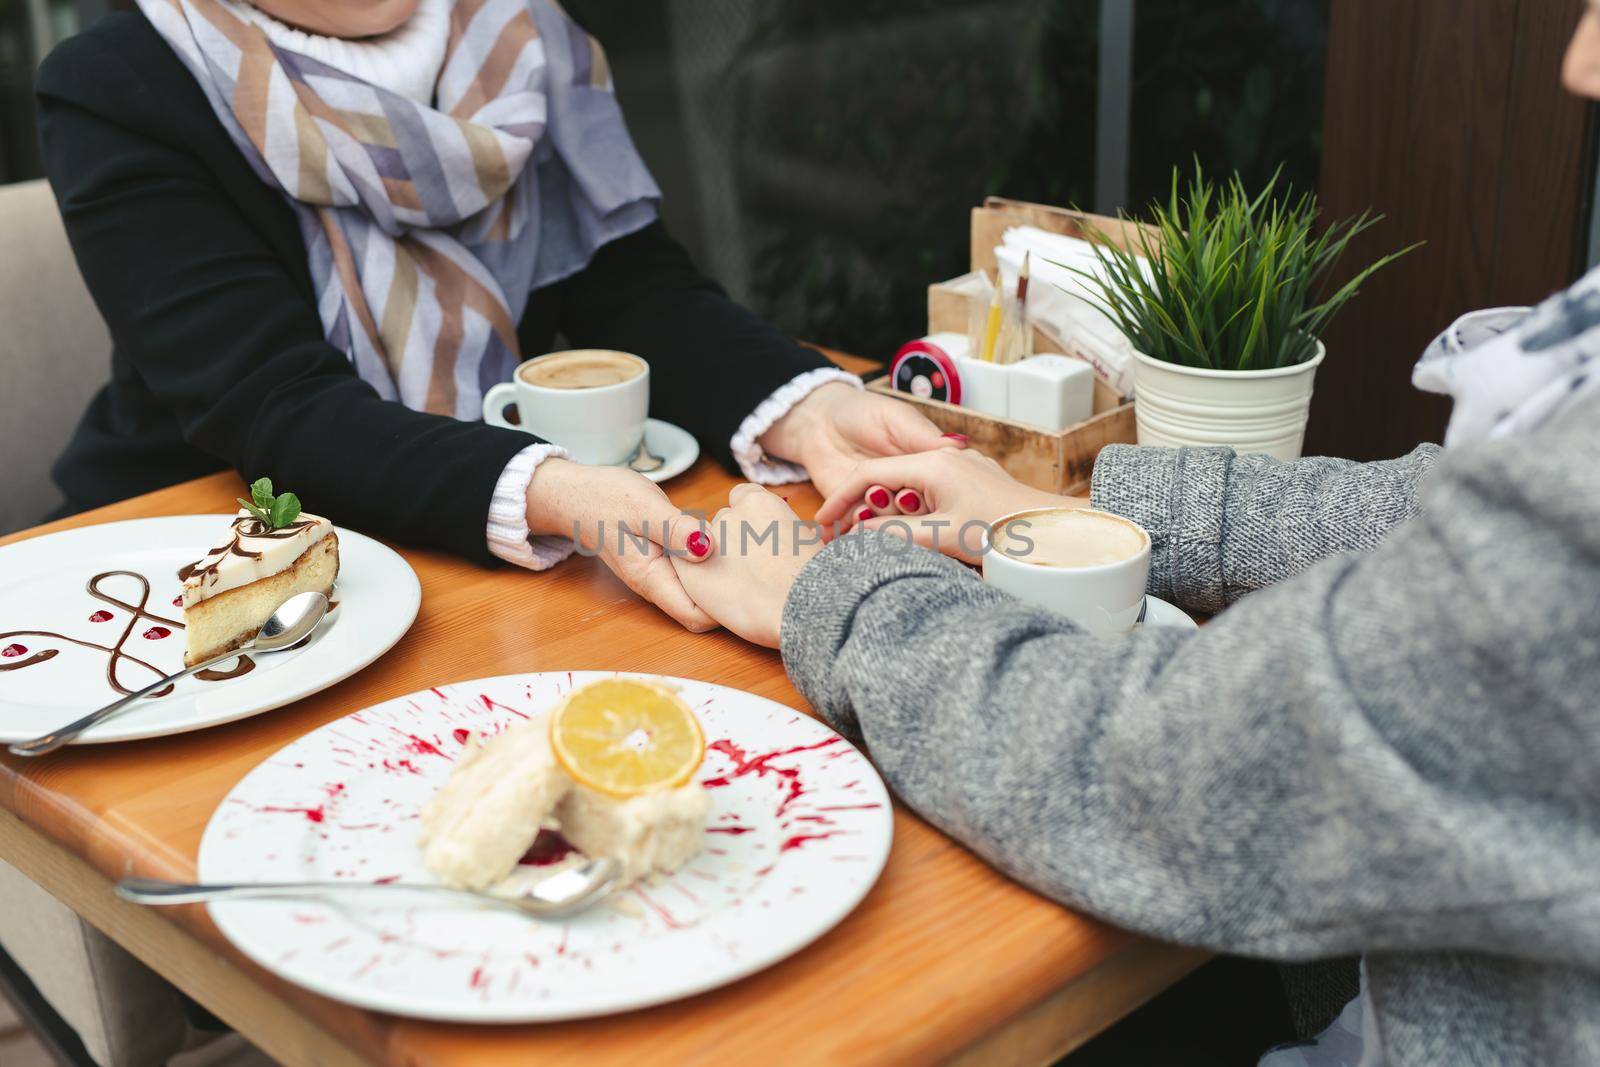 Close-up of a mother and daughter's hands on a wooden table in a cafe. Adult mother and daughter hold hands and drink coffee.